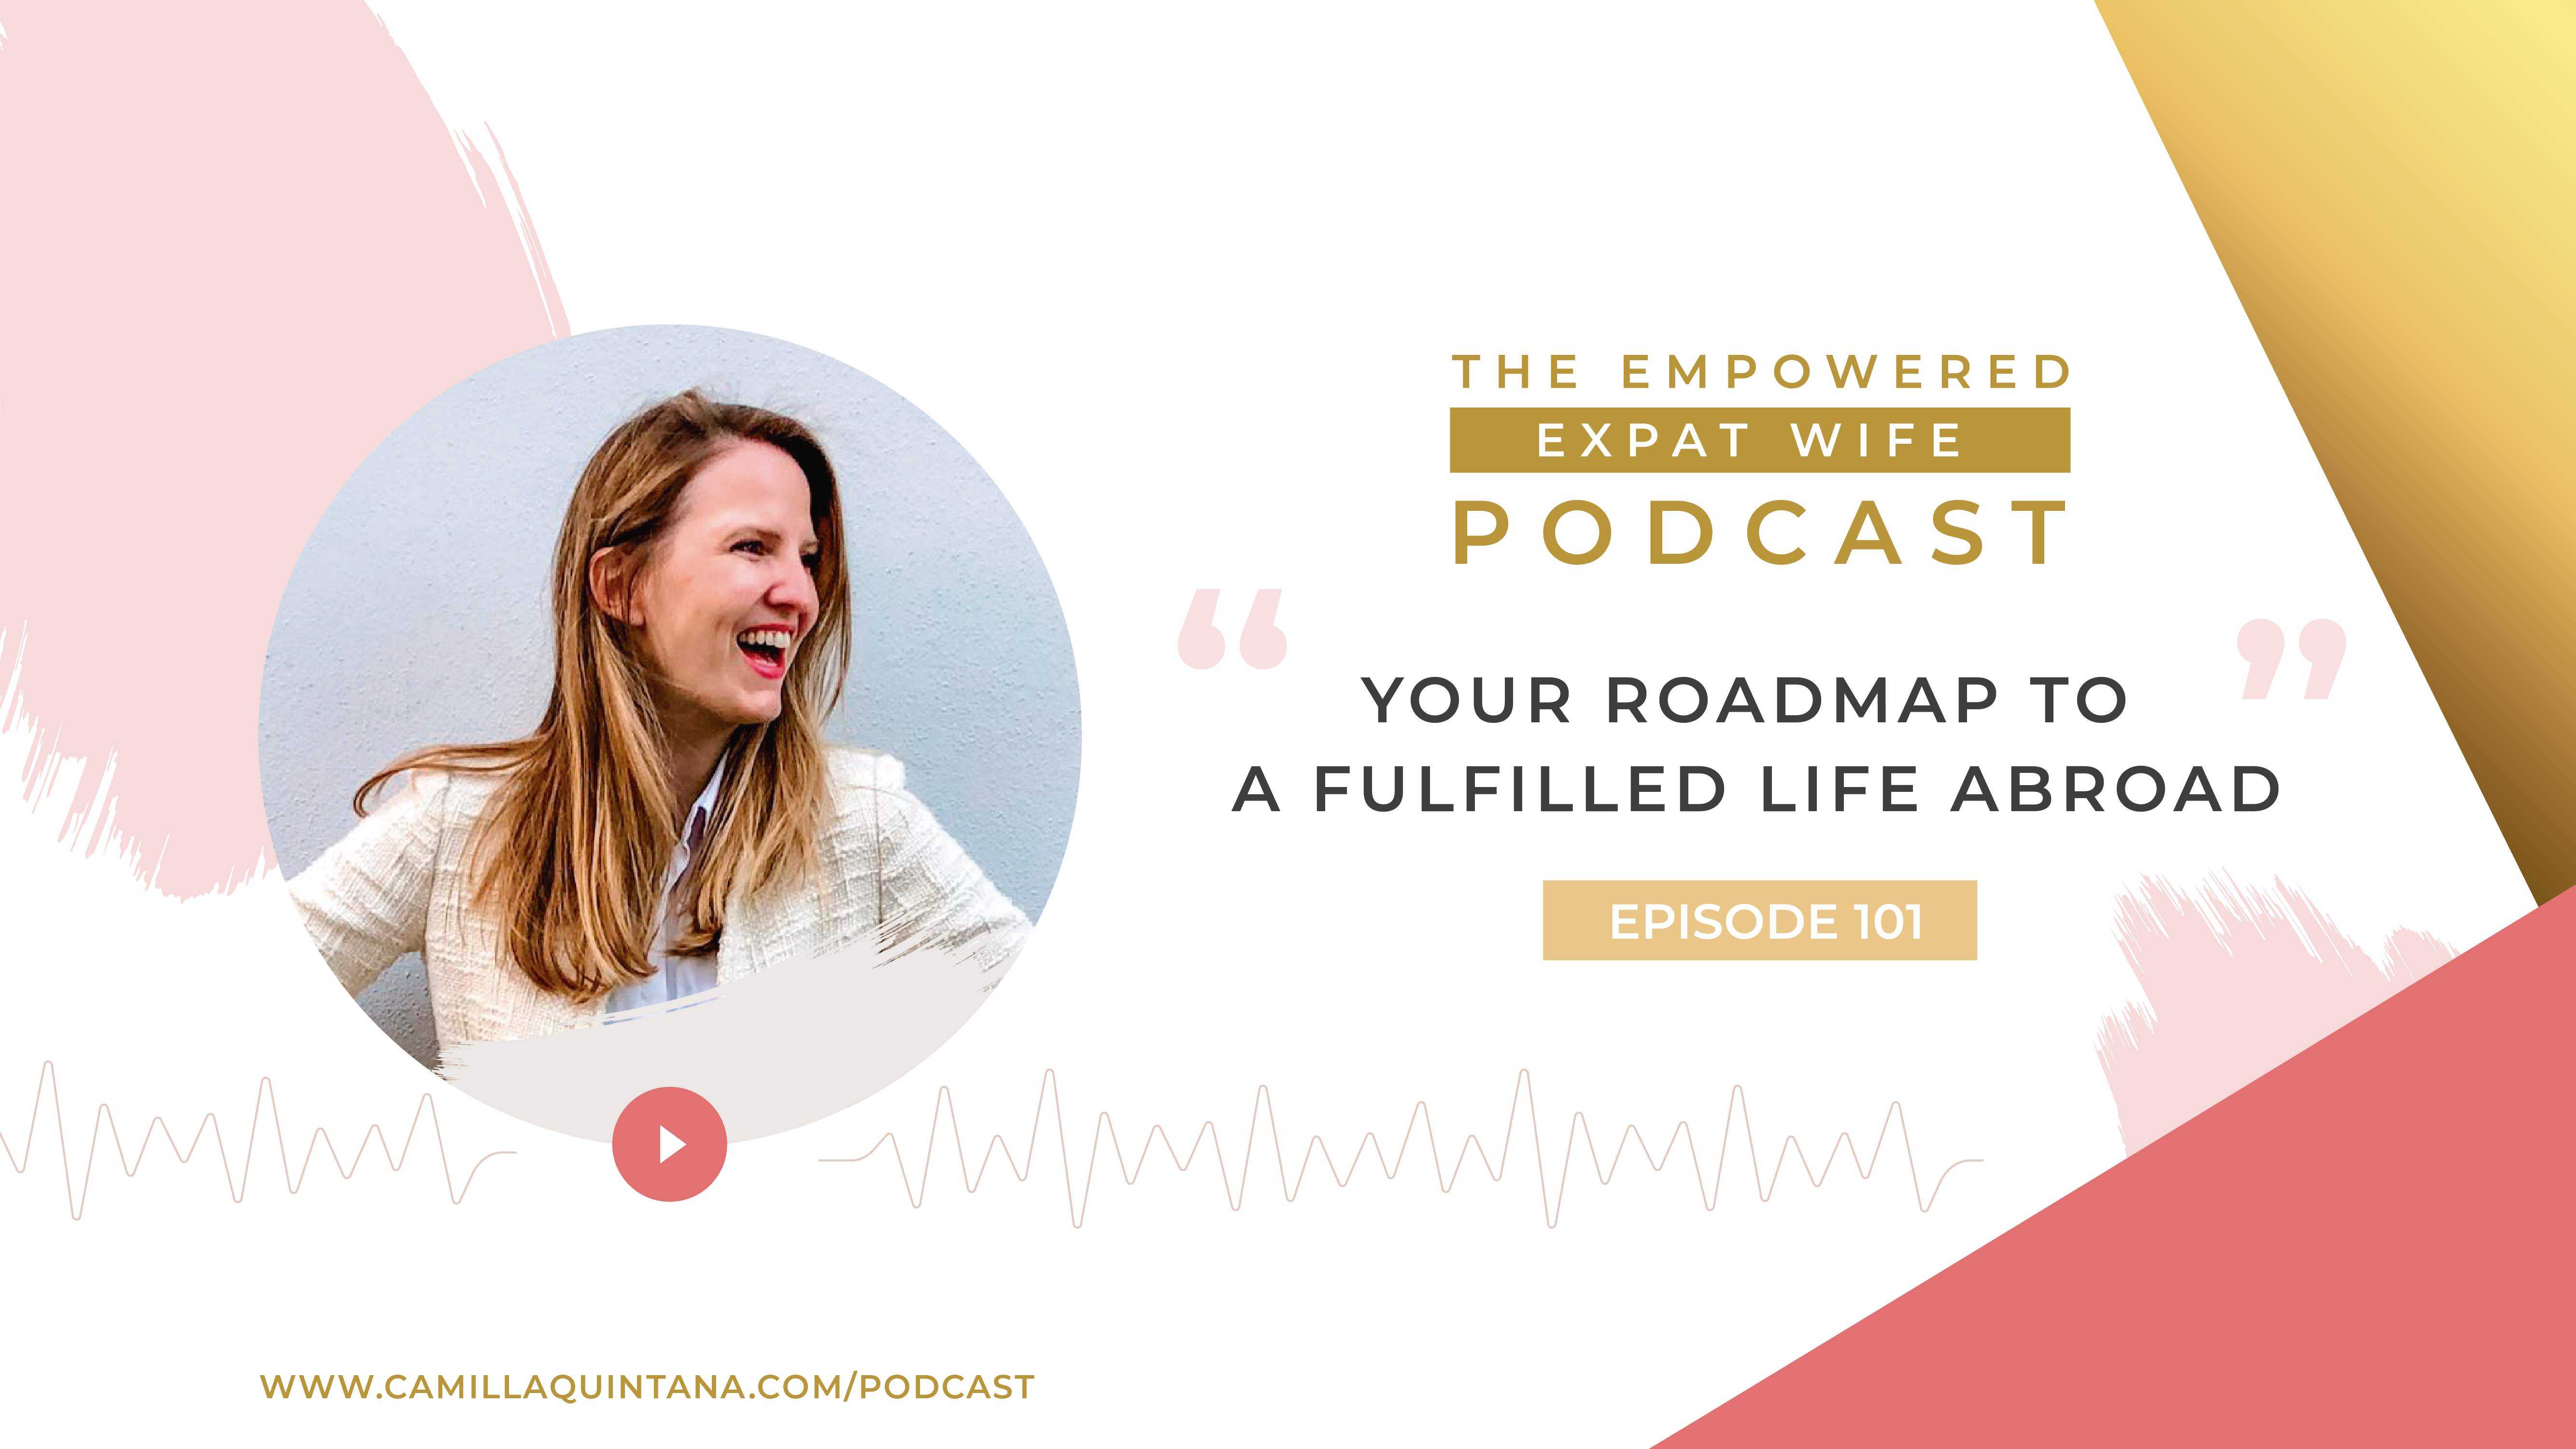 Episode 1 – Your Roadmap to a Fulfilled Life Abroad